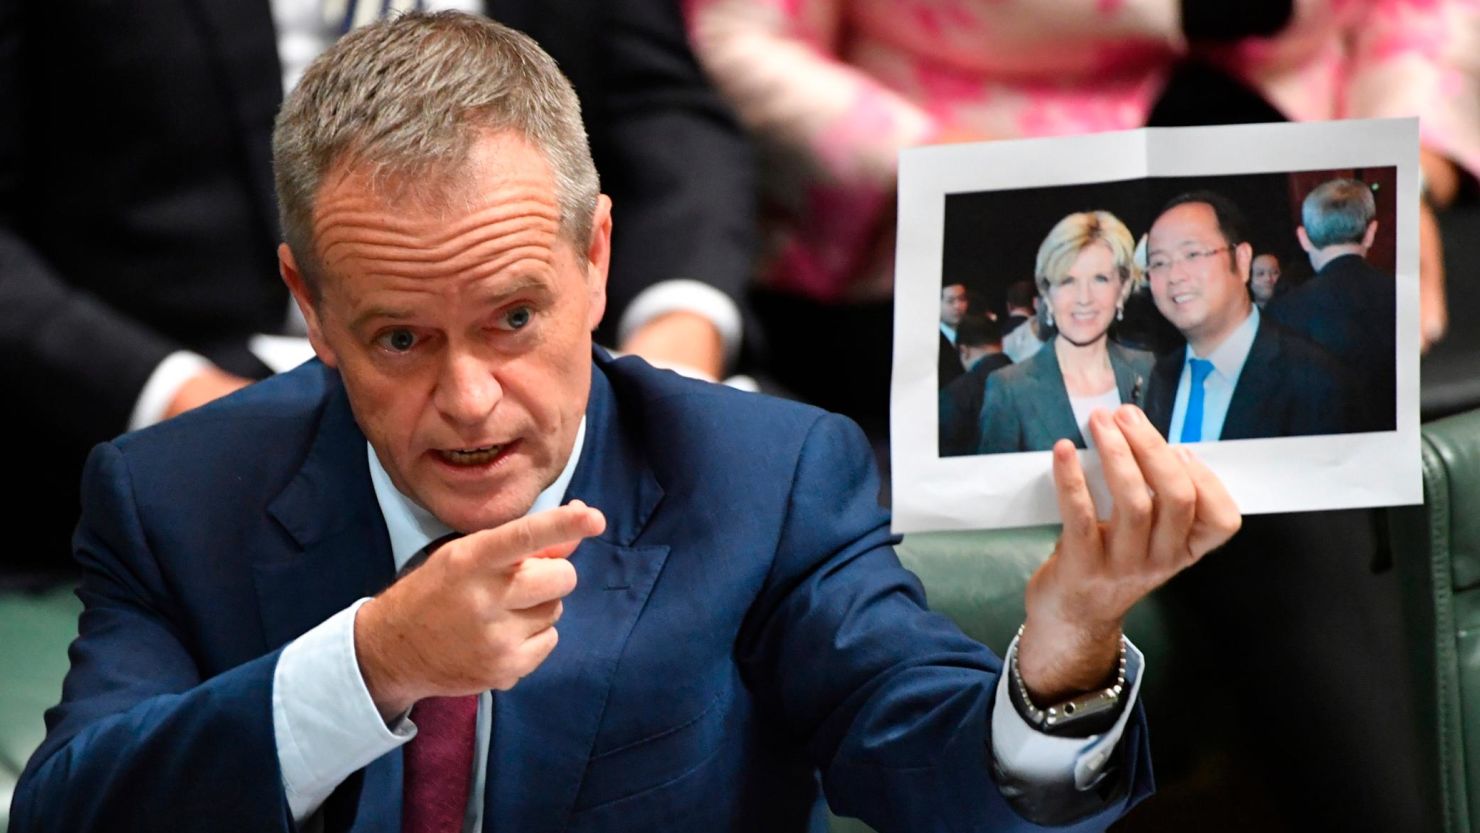 Leader of the opposition Labor Party Bill Shorten holds a photograph of Minister for Foreign Affairs Julie Bishop and Chinese businessman Huang Xiangmo in 2017.